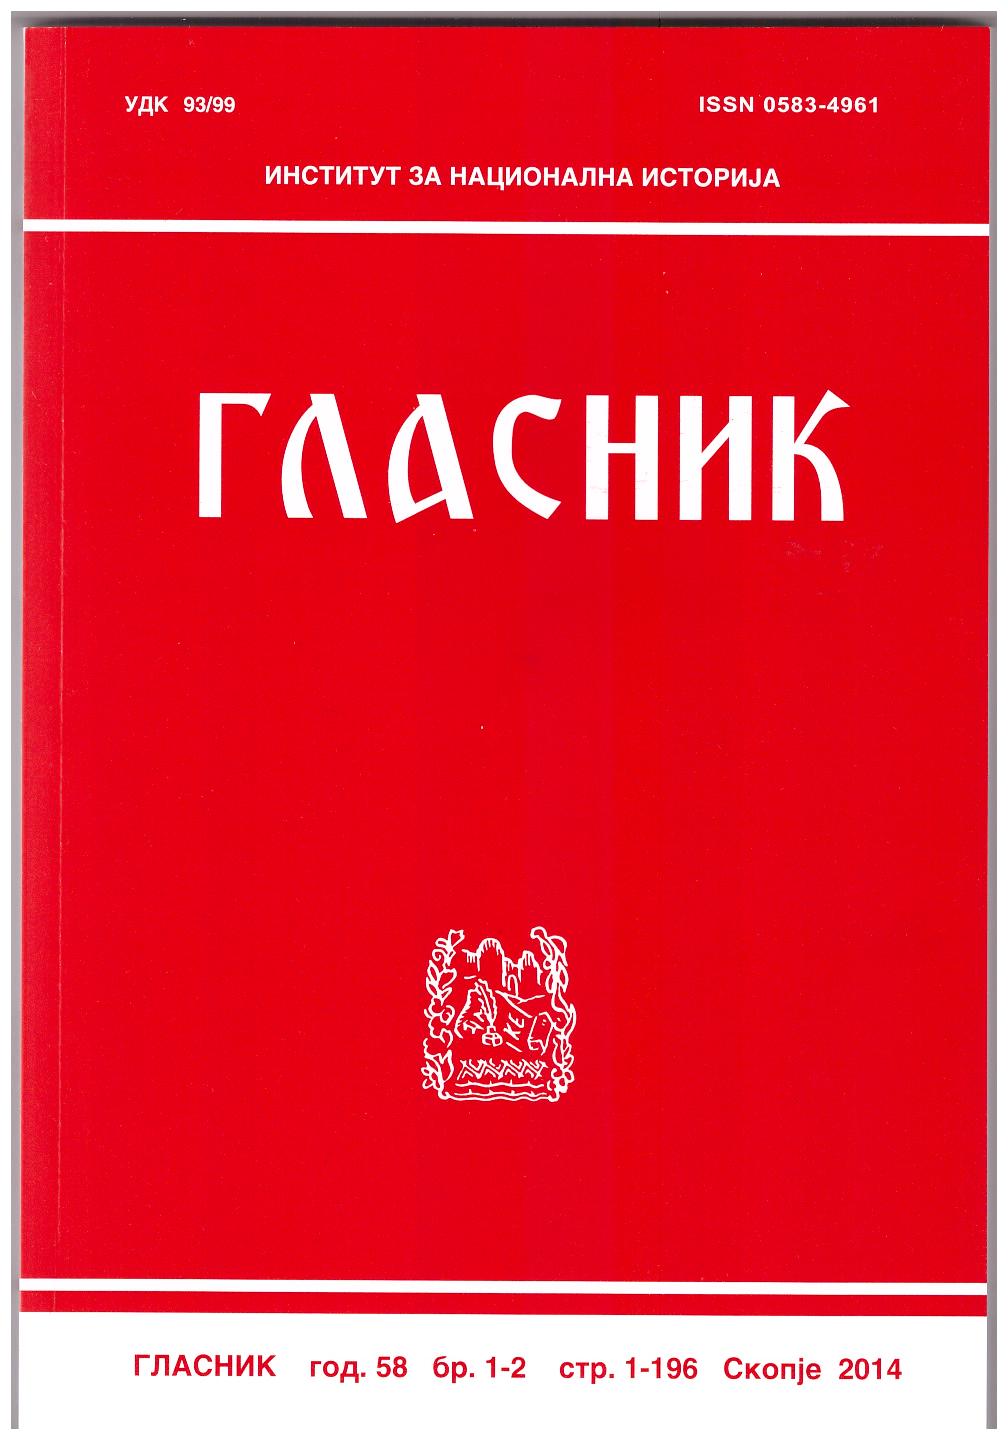 POST FESTUM PROMOTIONAL LETTER OF THE BOOK BY CHAVDAR MARINOV: THE MACEDONIAN ISSUE FROM 1944 TO THE PRESENT, COMMUNISM AND NATIONALISM OF THE BALKANS Cover Image